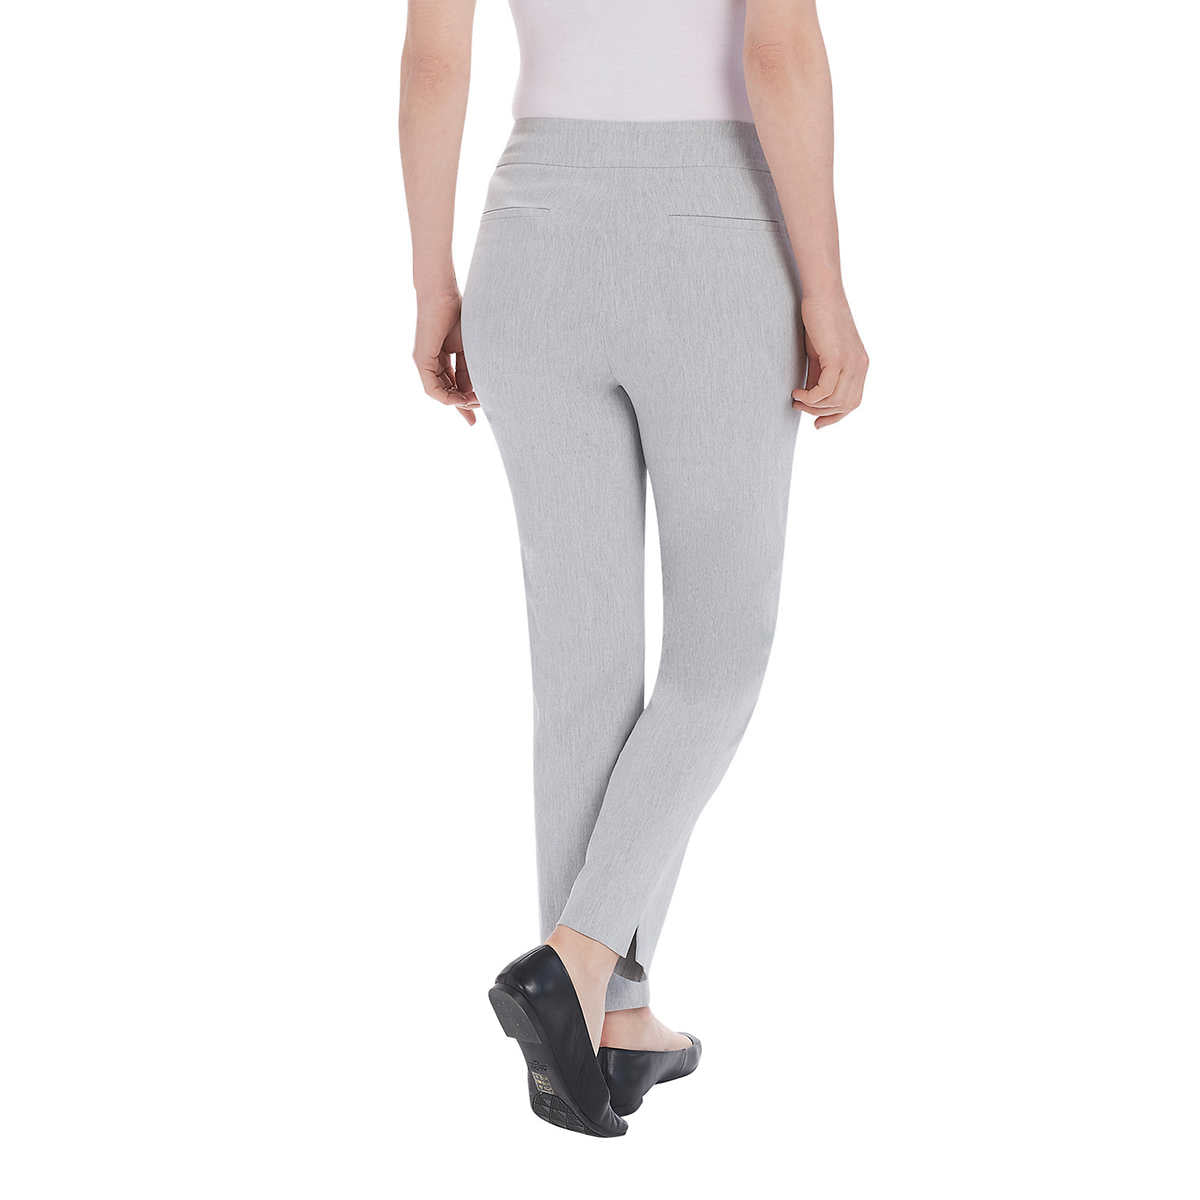 Hilary Radley Ladies' Tummy Control Pull-On Pant with Pockets